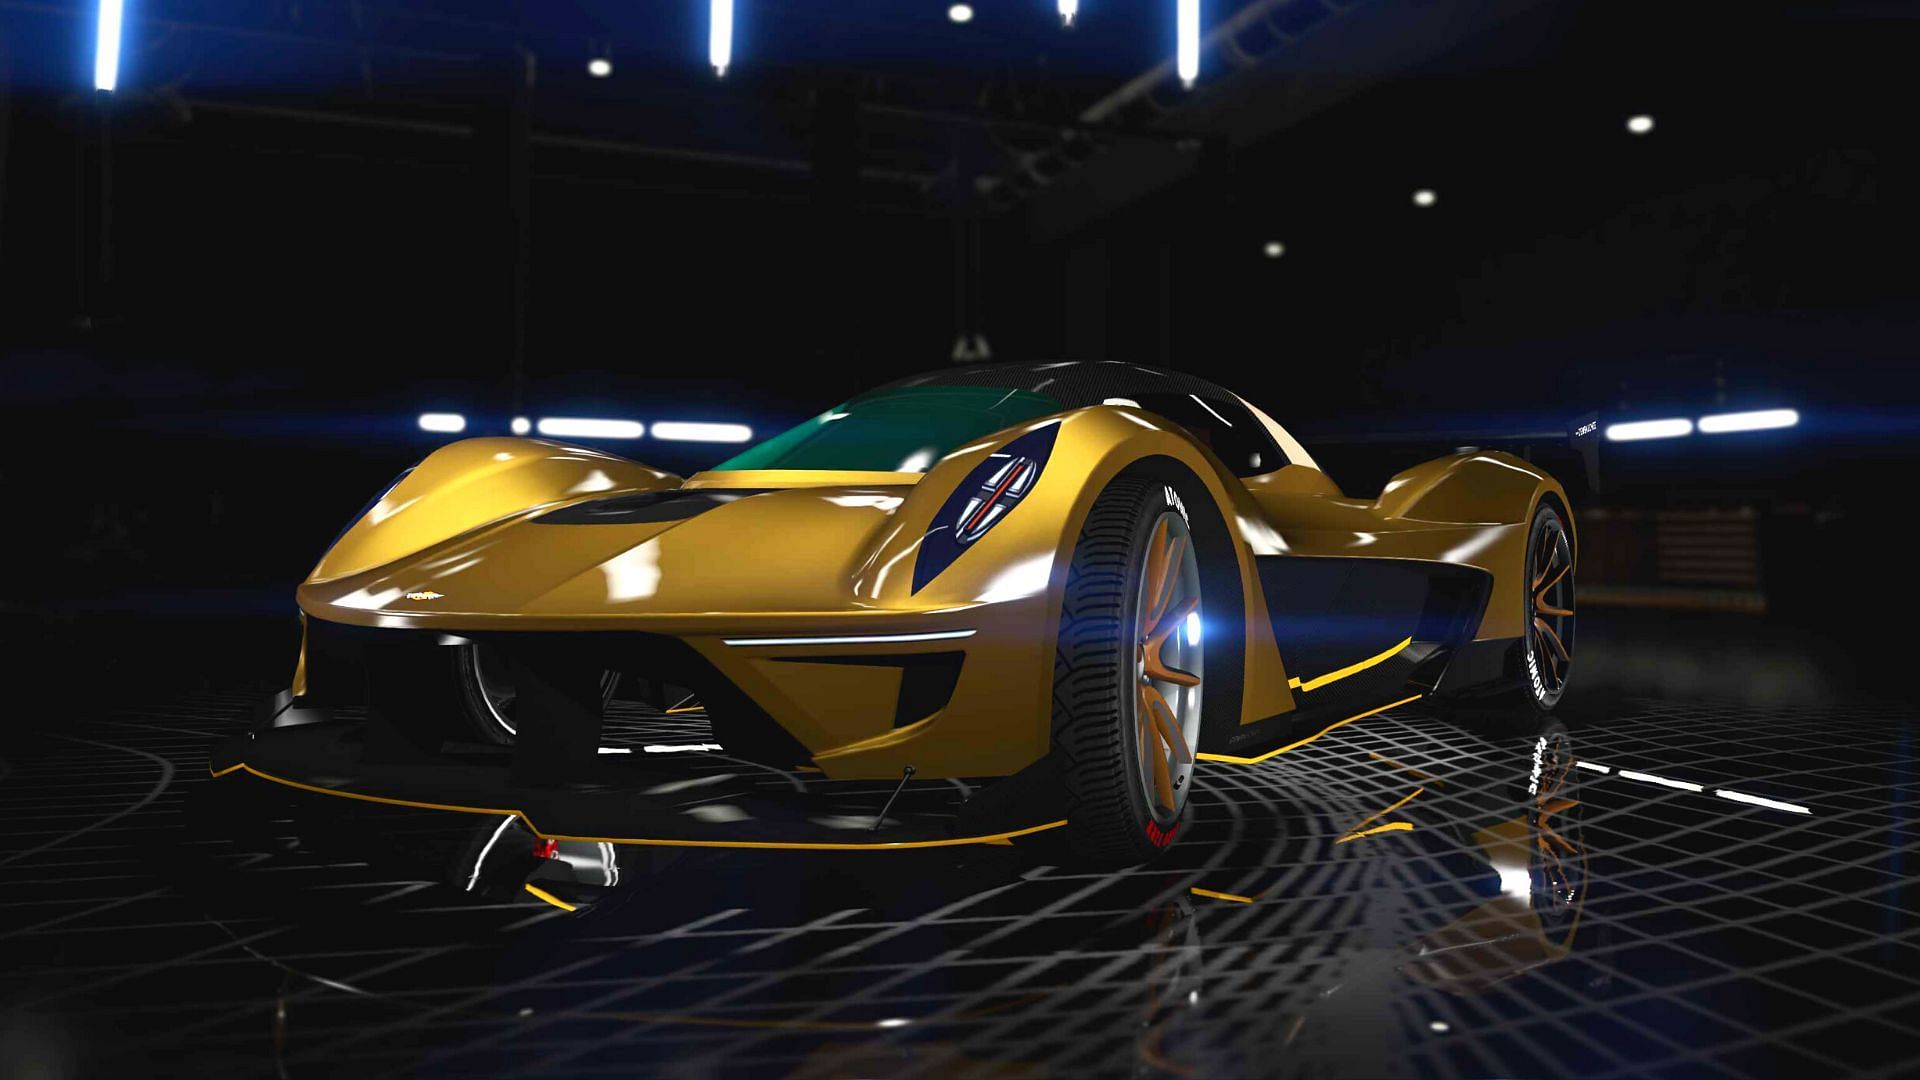 5 GTA Online has cost-efficient cars for players to check out (Image via Rockstar Games)